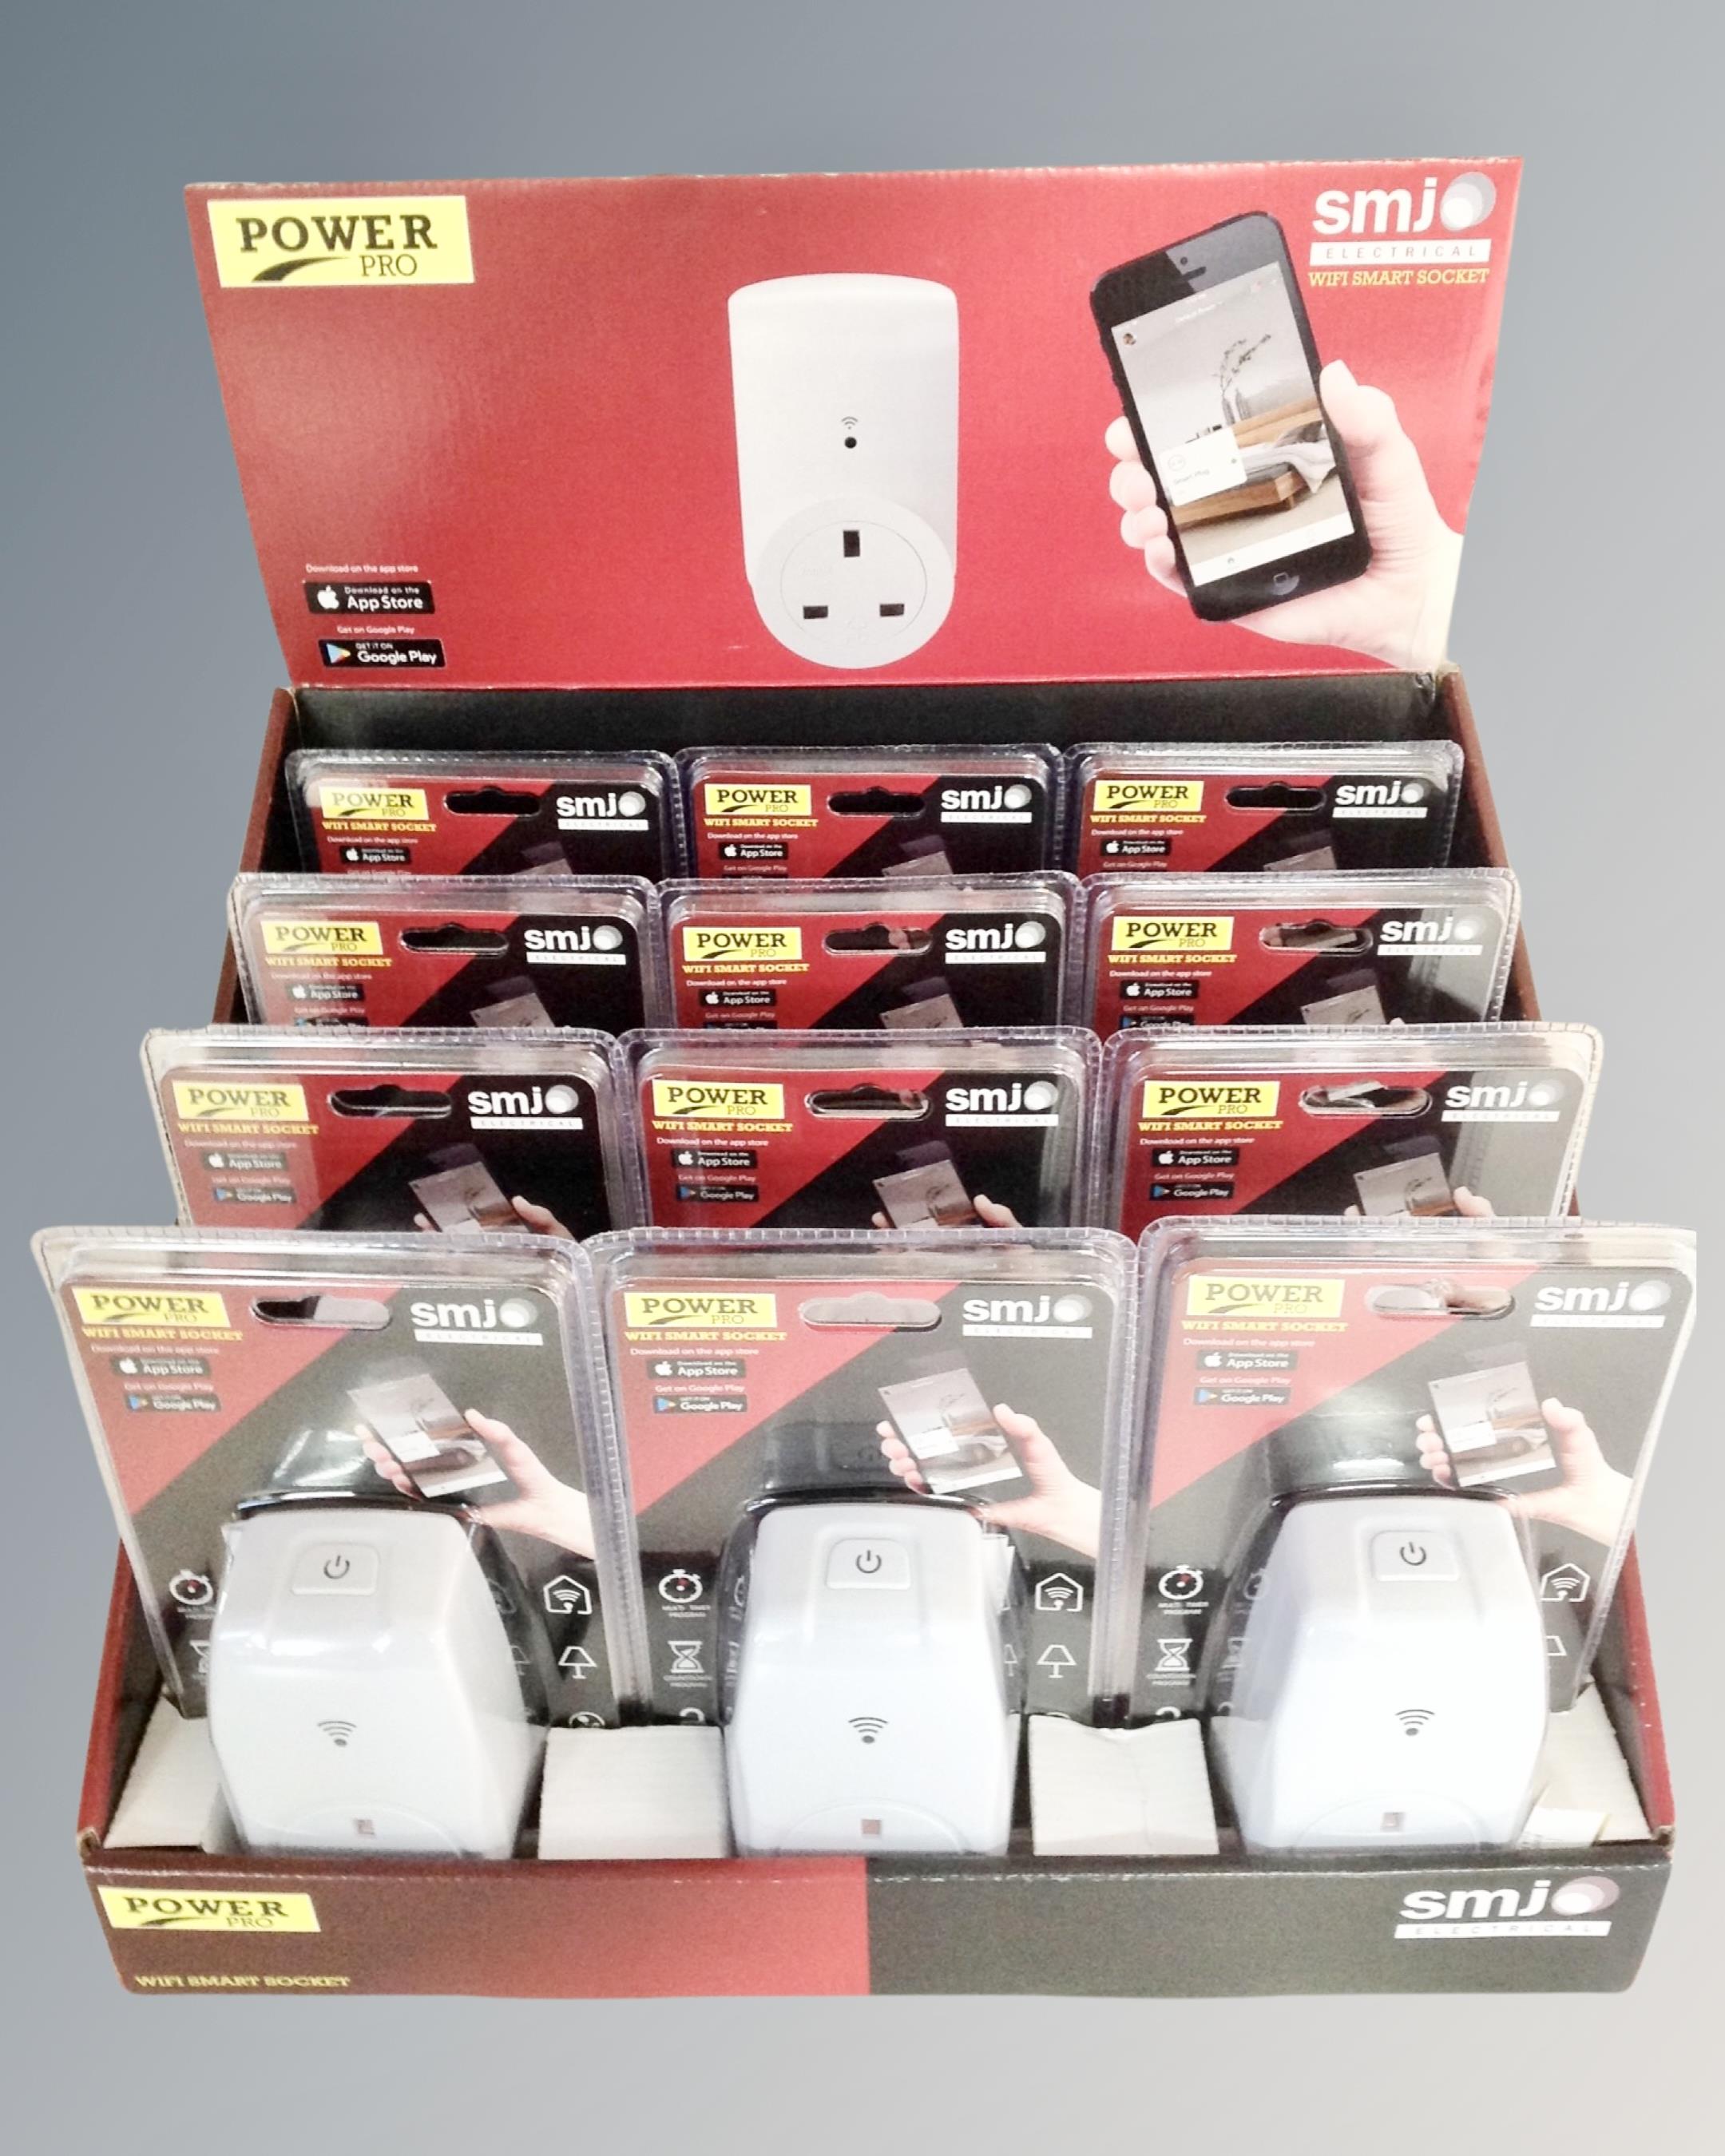 12 Powerpro wifi smart sockets, sealed and new, in cardboard shop display stand.